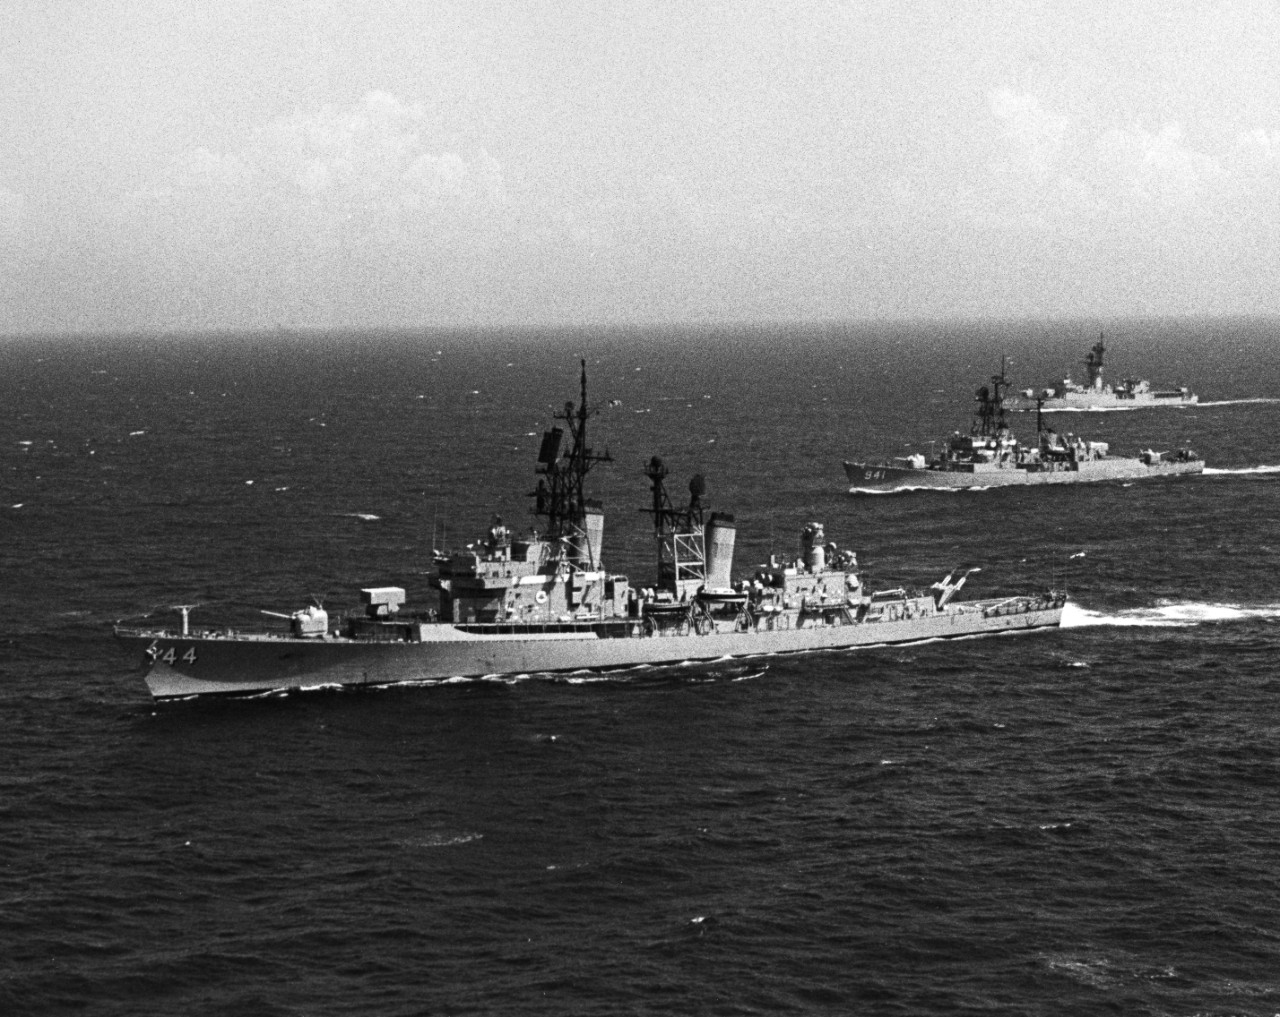 Front to back: USS William V. Pratt (DDG-44), USS DuPont (DD-941), and USS Bowen (FF-1079), of Task Group 138, underway during inter-American exercises of UNITAS XIX, September 1978.